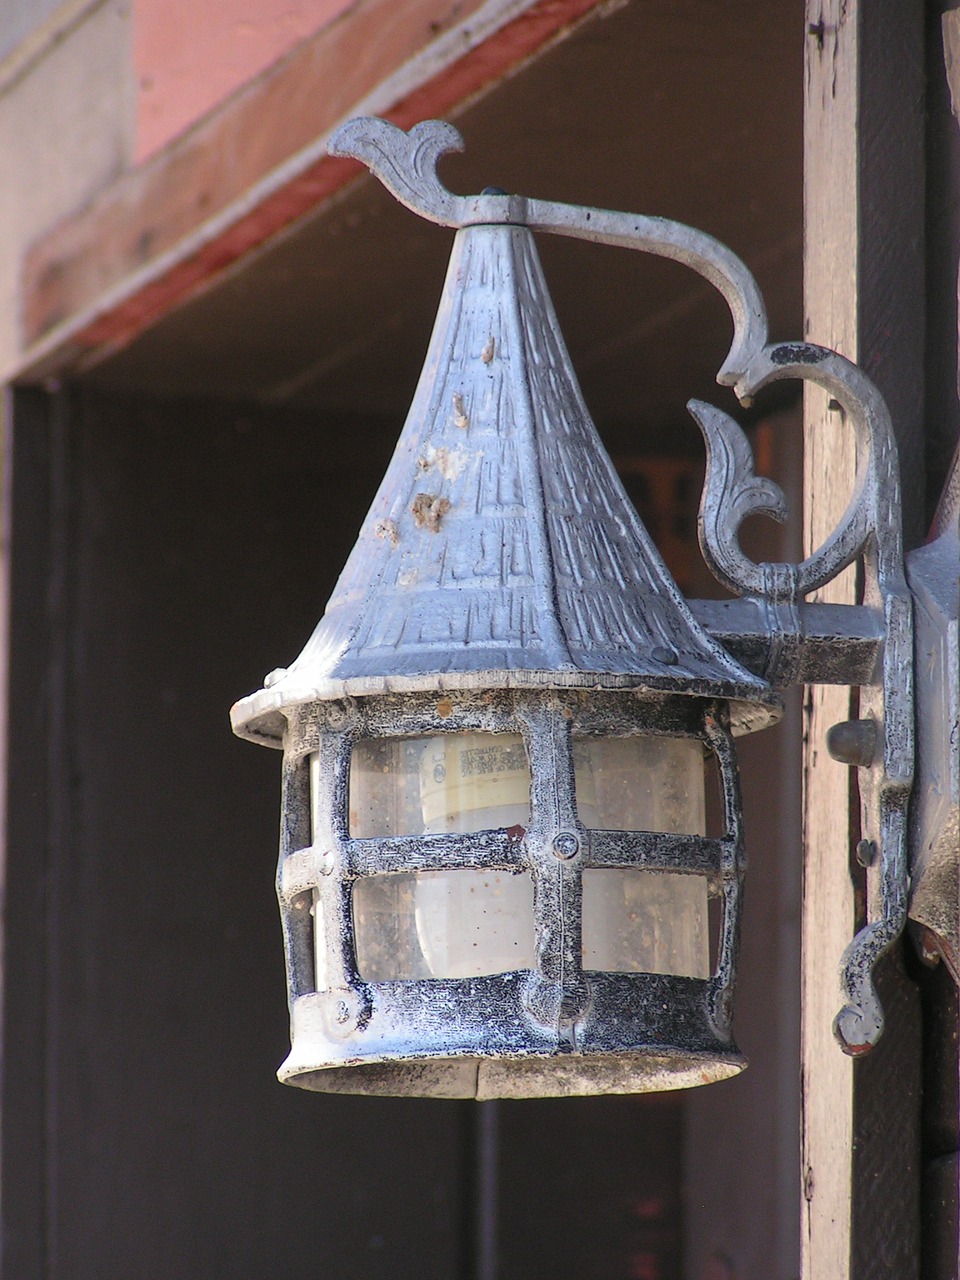 scotty's castle lamp death valley free photo